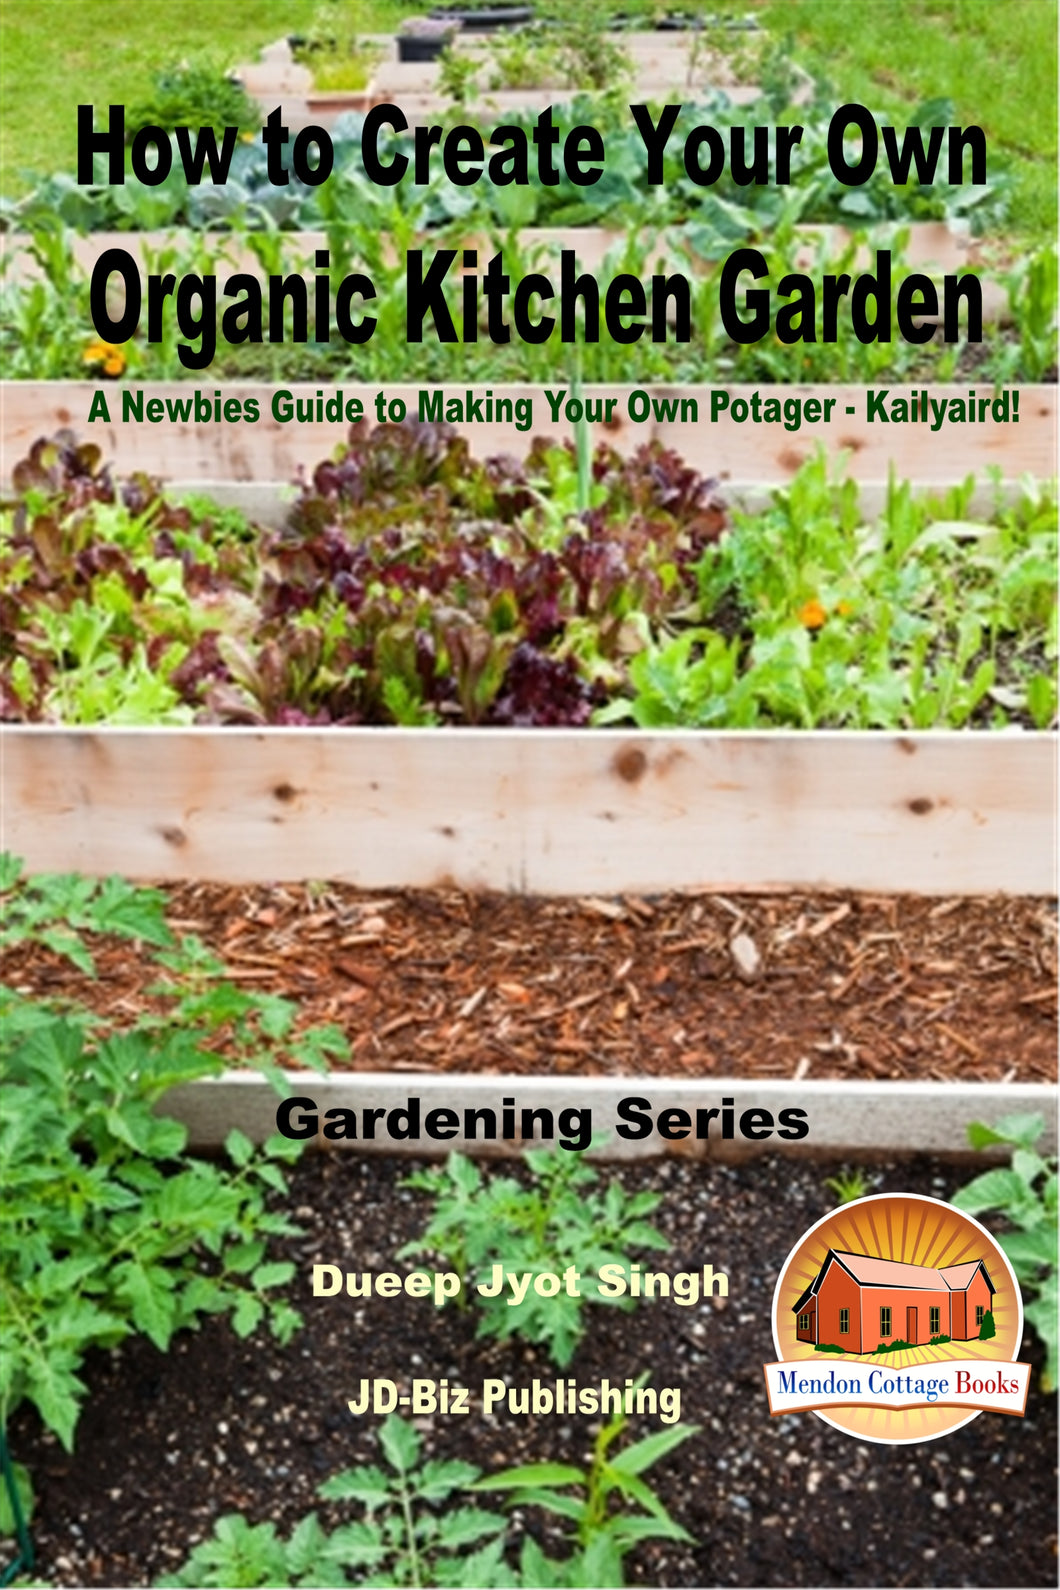 How to Create Your Own Organic Kitchen Garden